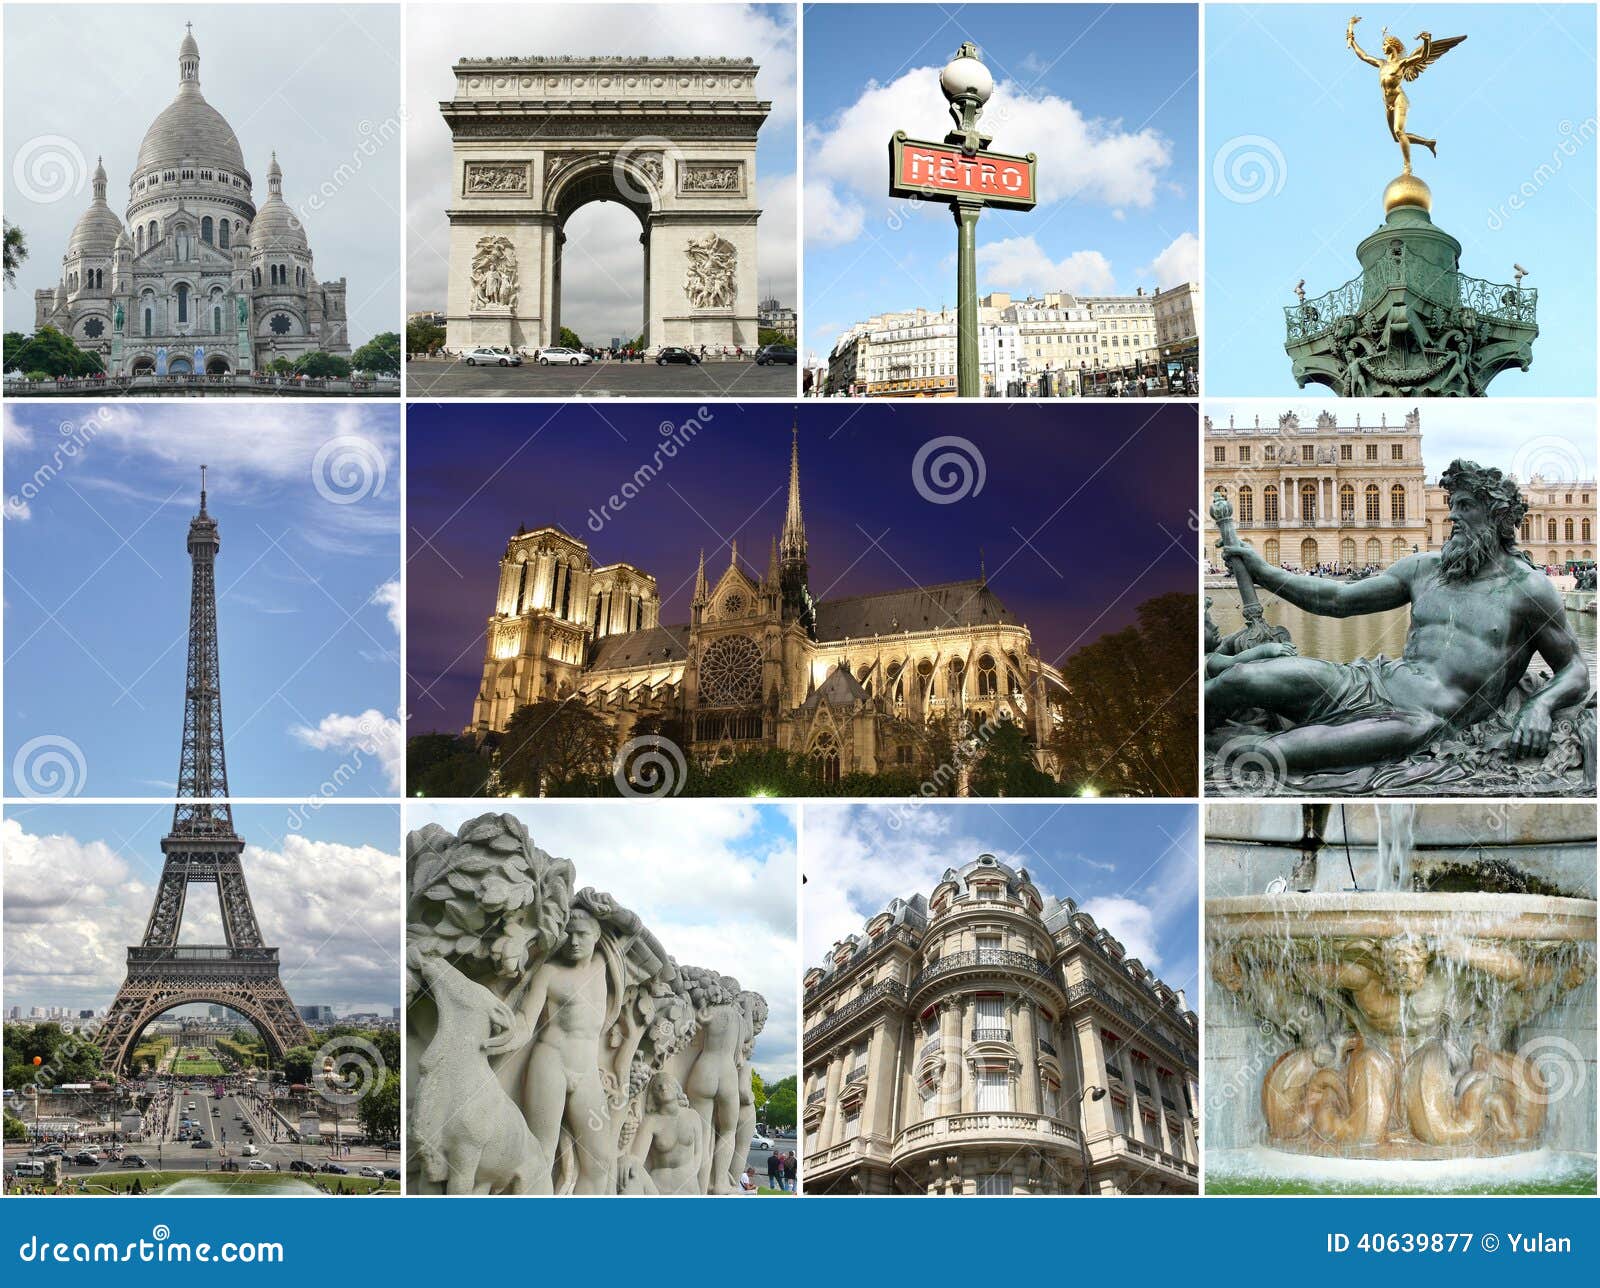 Paris Collage - Tourist Highlights Stock Image - Image of elysapound, monument: